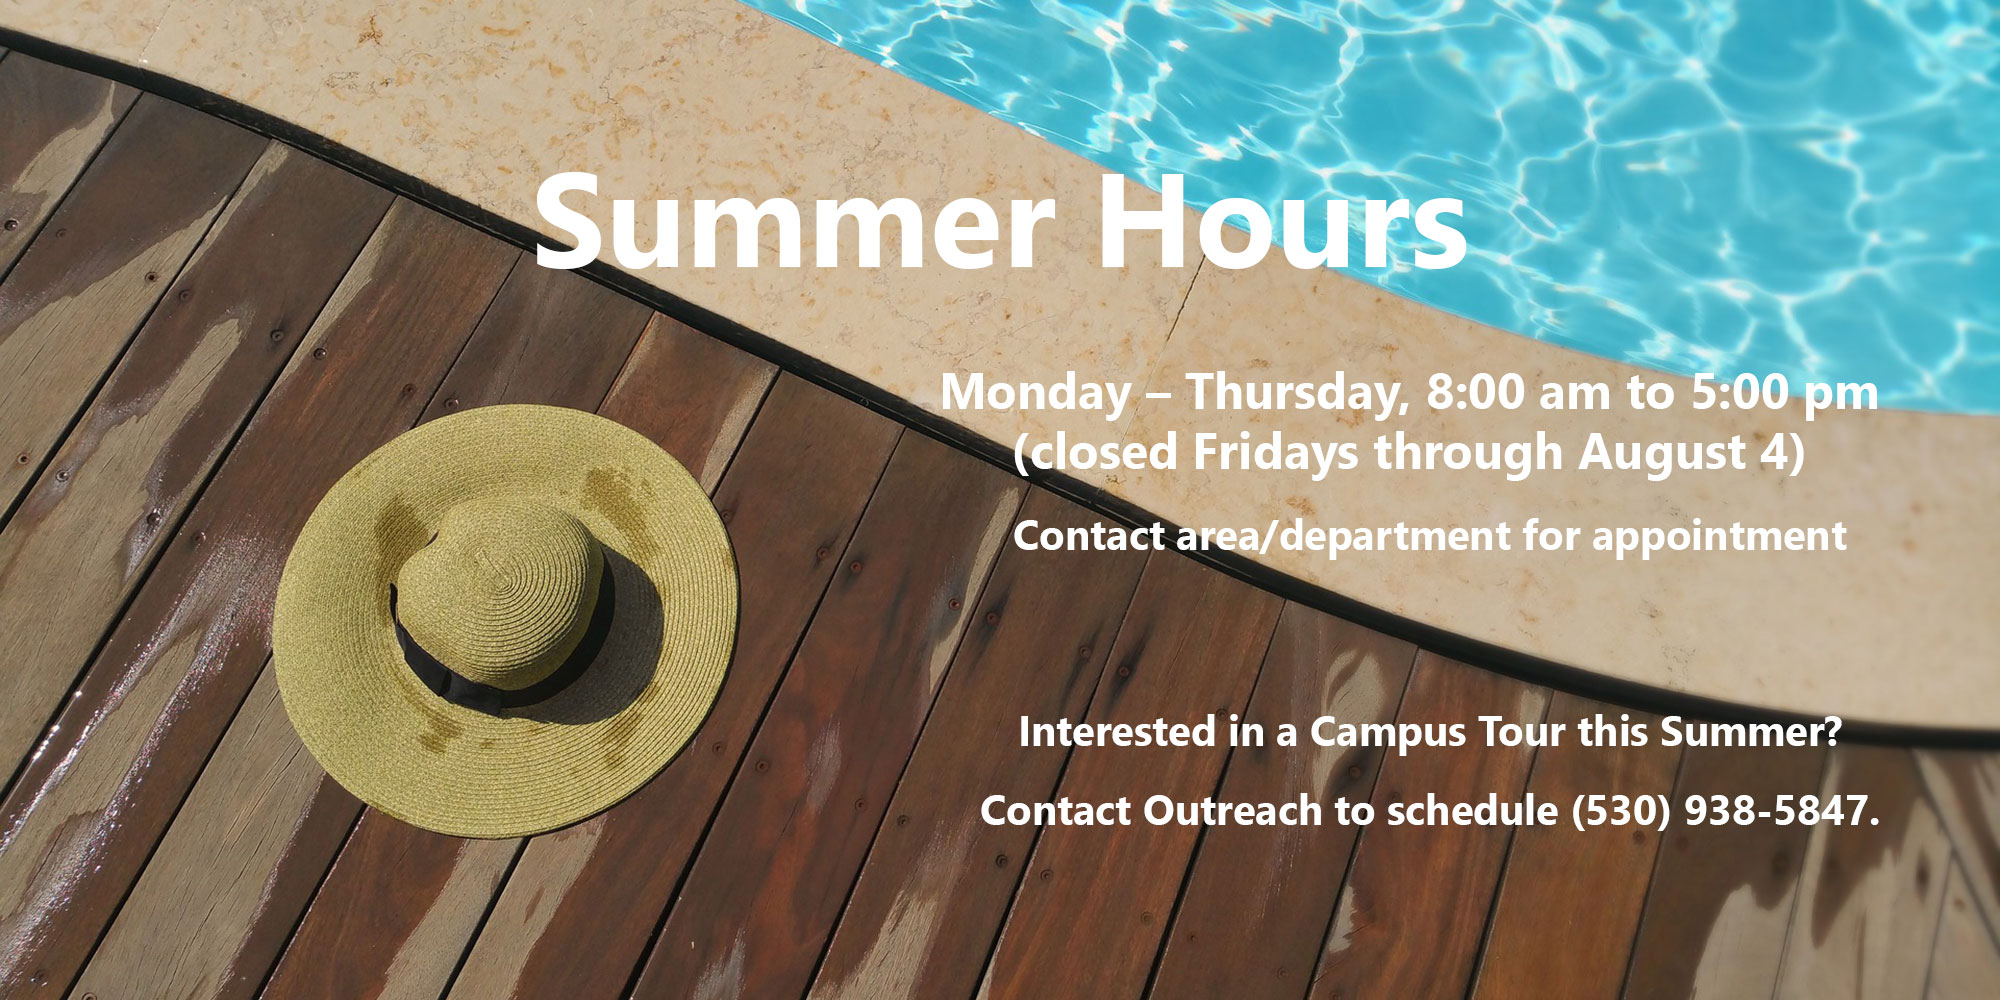 Summer Hours. Monday – Thursday, 8:00 am to 5:00 pm
(closed Fridays through August 5